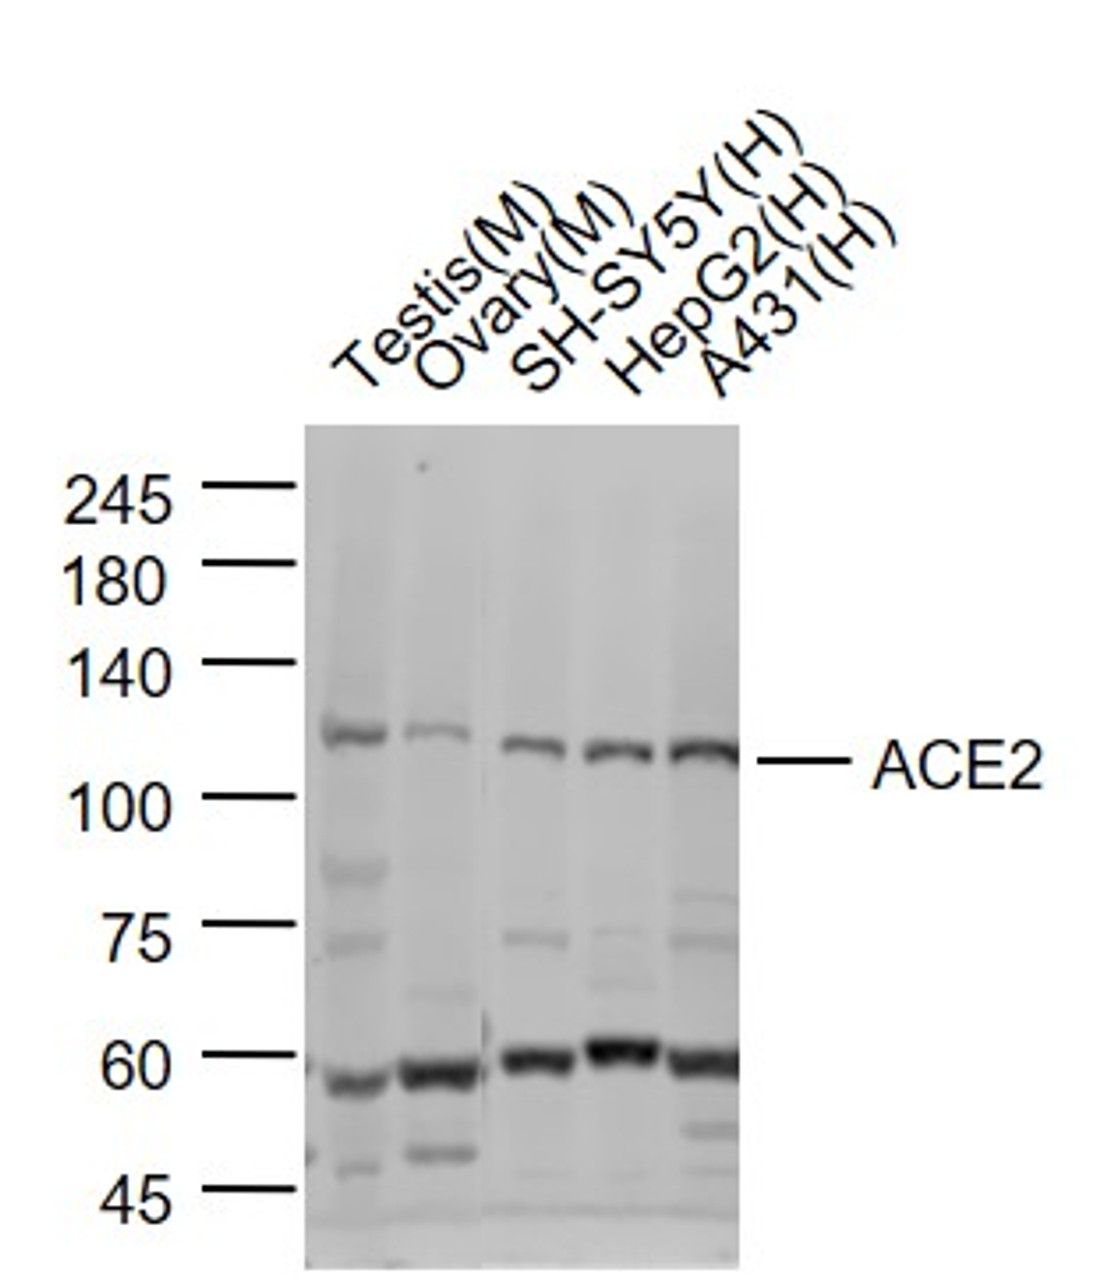 <strong>Figure 2 Western Blot Validation of ACE2</strong><br>
Lane 1: mouse testis lysates, Lane 2: mouse ovary lysates, Lane 3: SH-SY5Y cell lysates, Lane 4: HepG2 cell lysates and Lane 5: A431 cell lysates probed with ACE2 antibody, 10-603, at 1:1000 dilution and 4˚C overnight incubation. Followed by conjugated secondary antibody incubation at 1:20000 for 60 min at 37˚C.